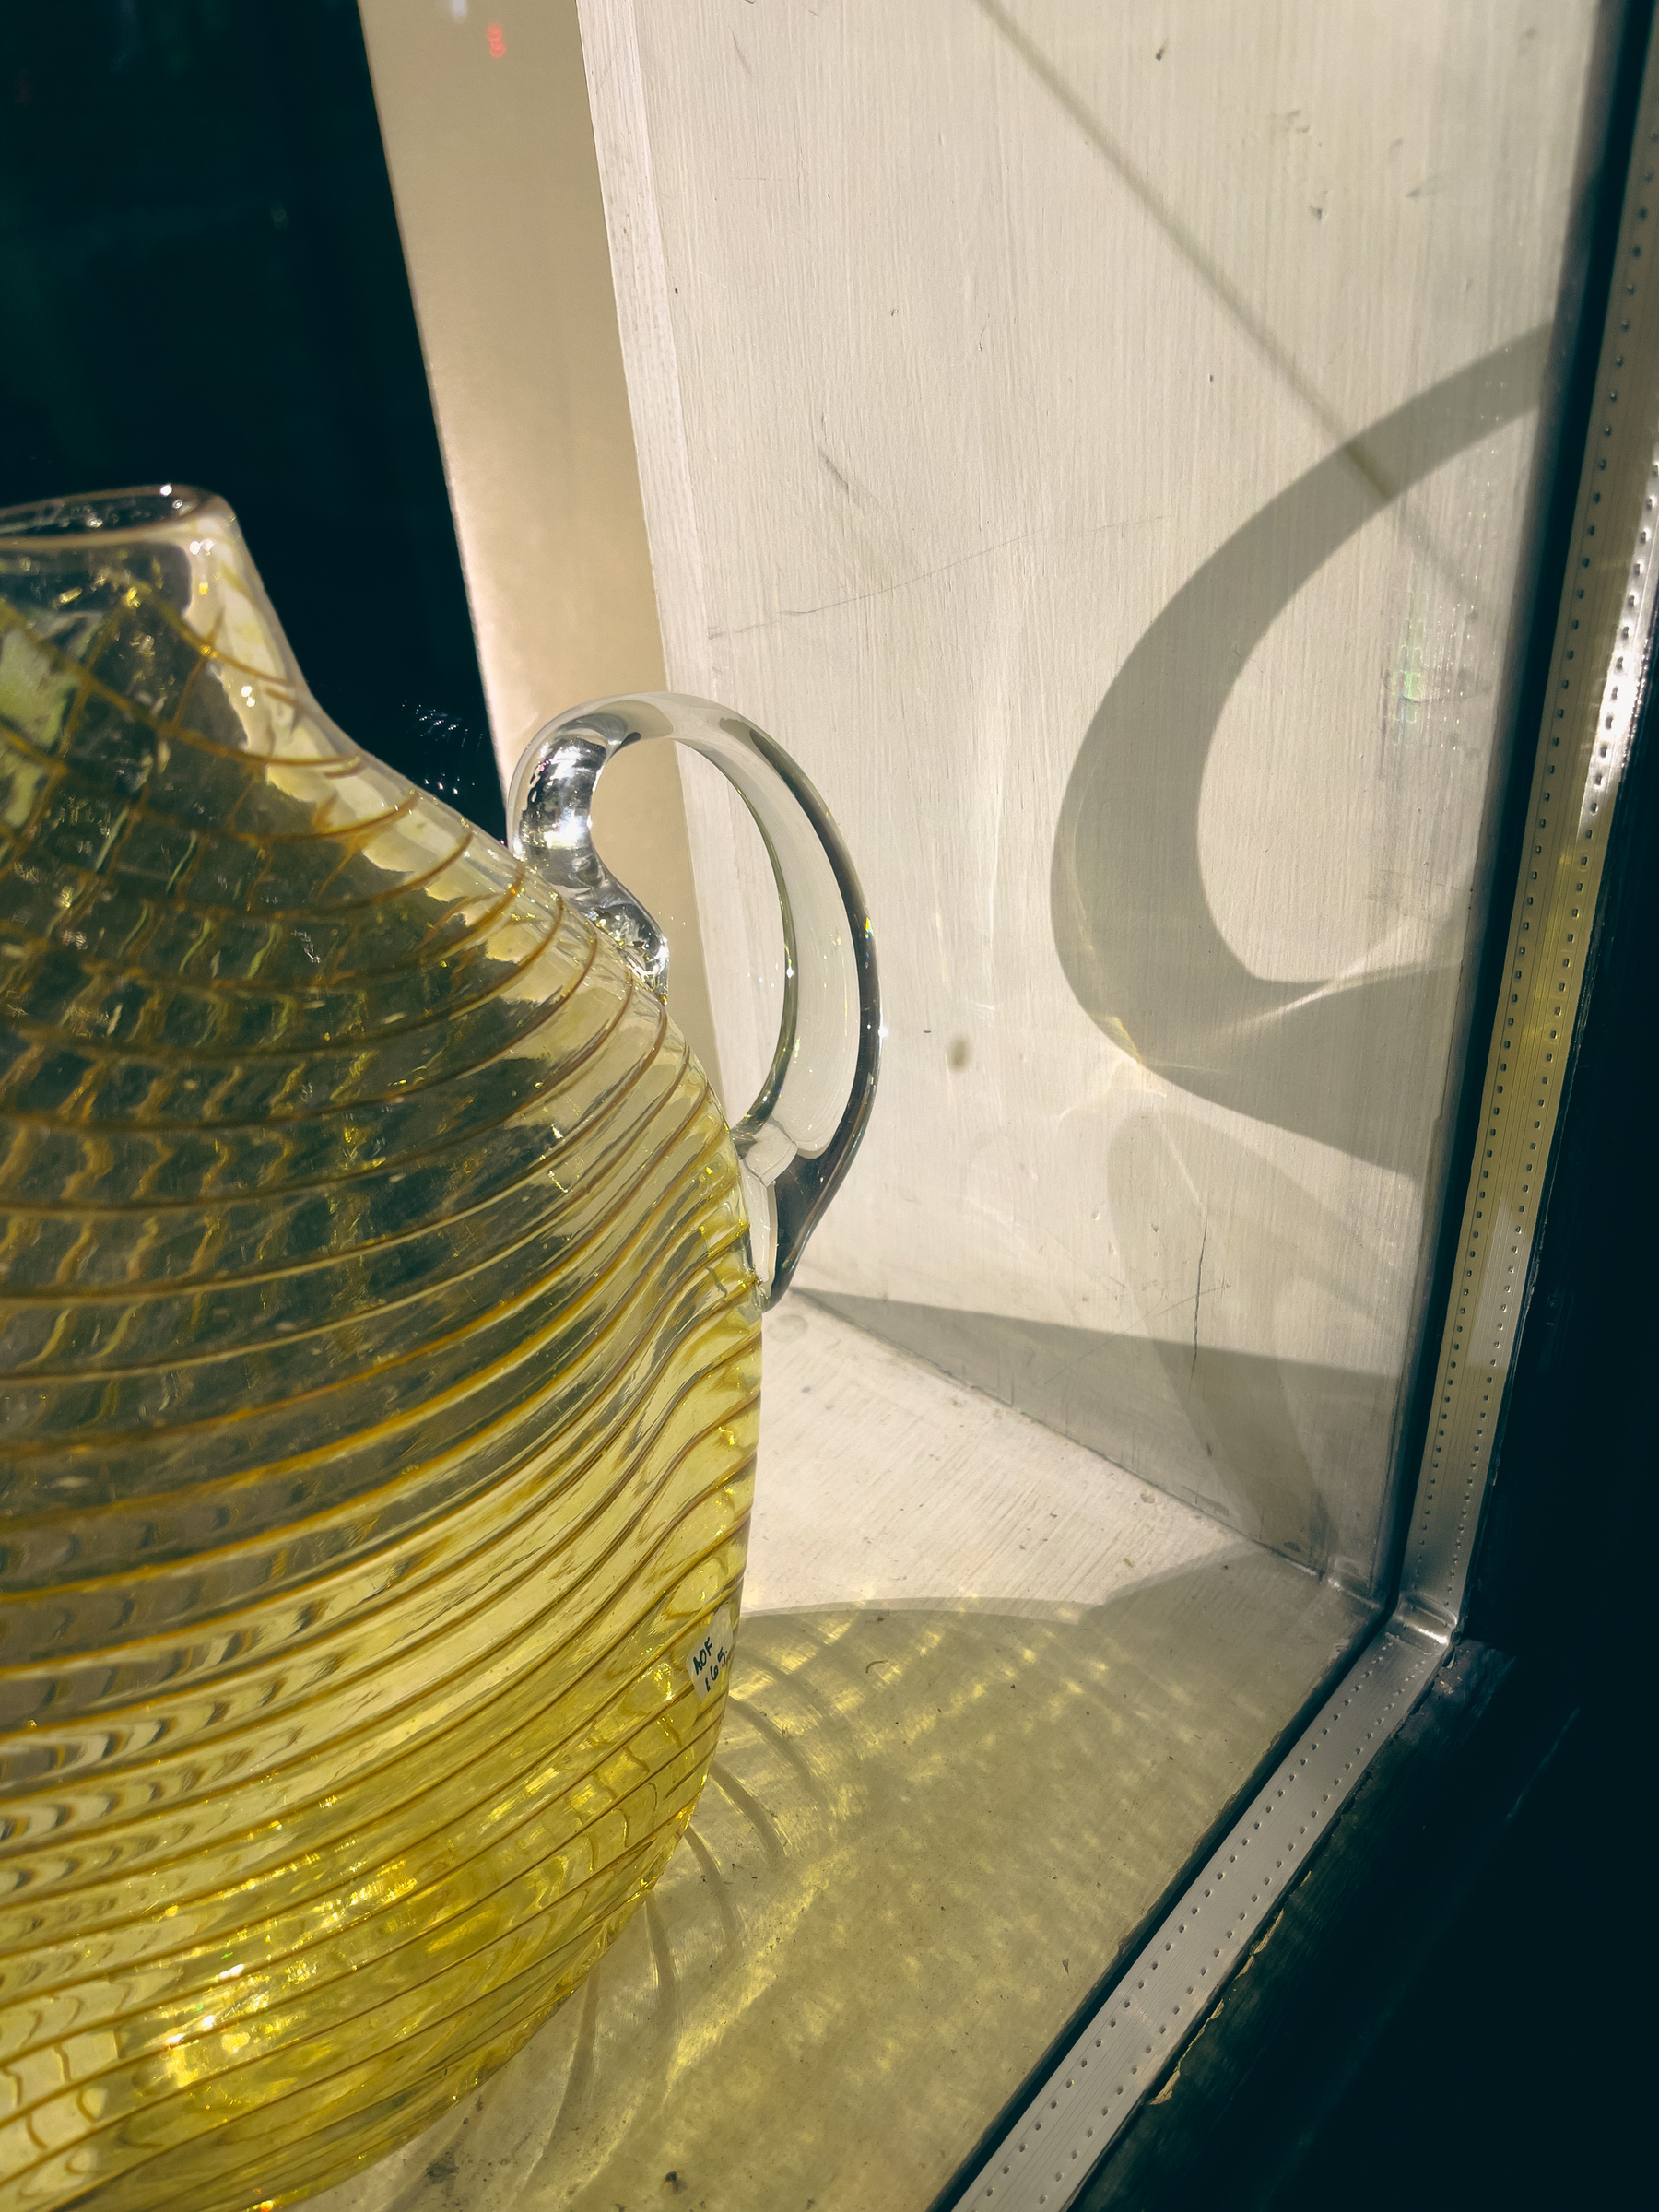 Art glass pitcher in a shop window display.